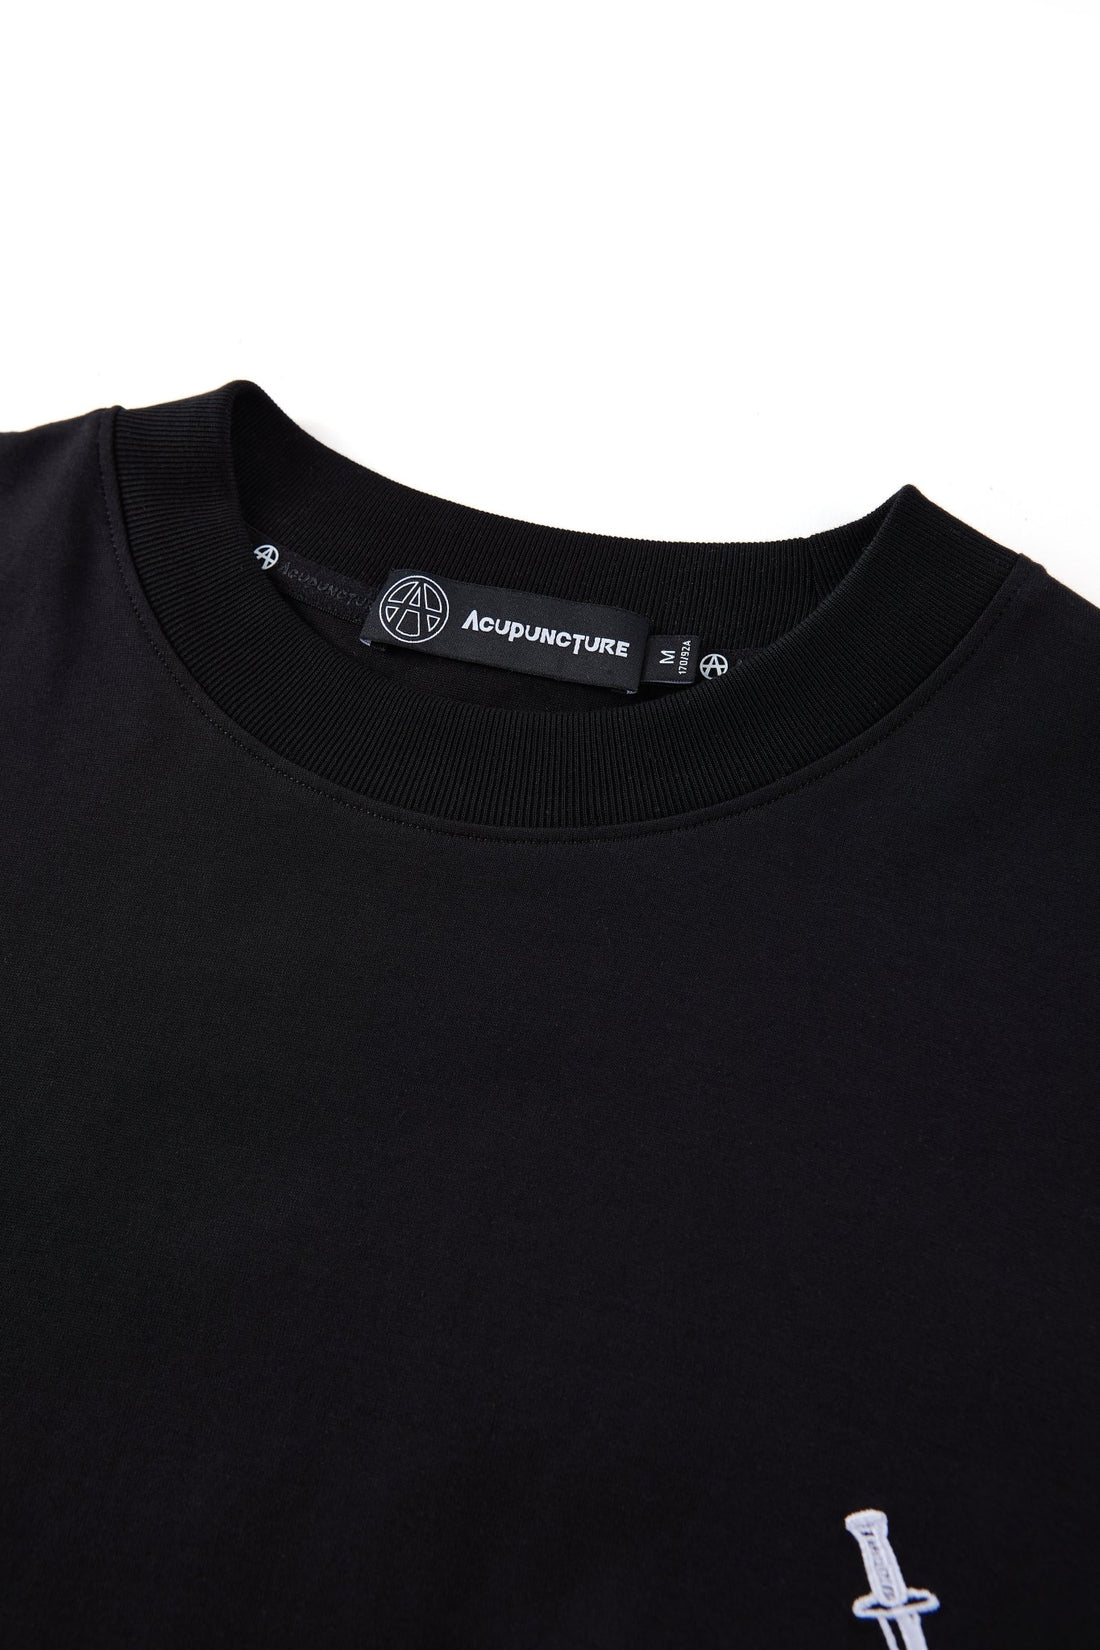 COLD WEAPON TSHIRT BLACK Acupuncture